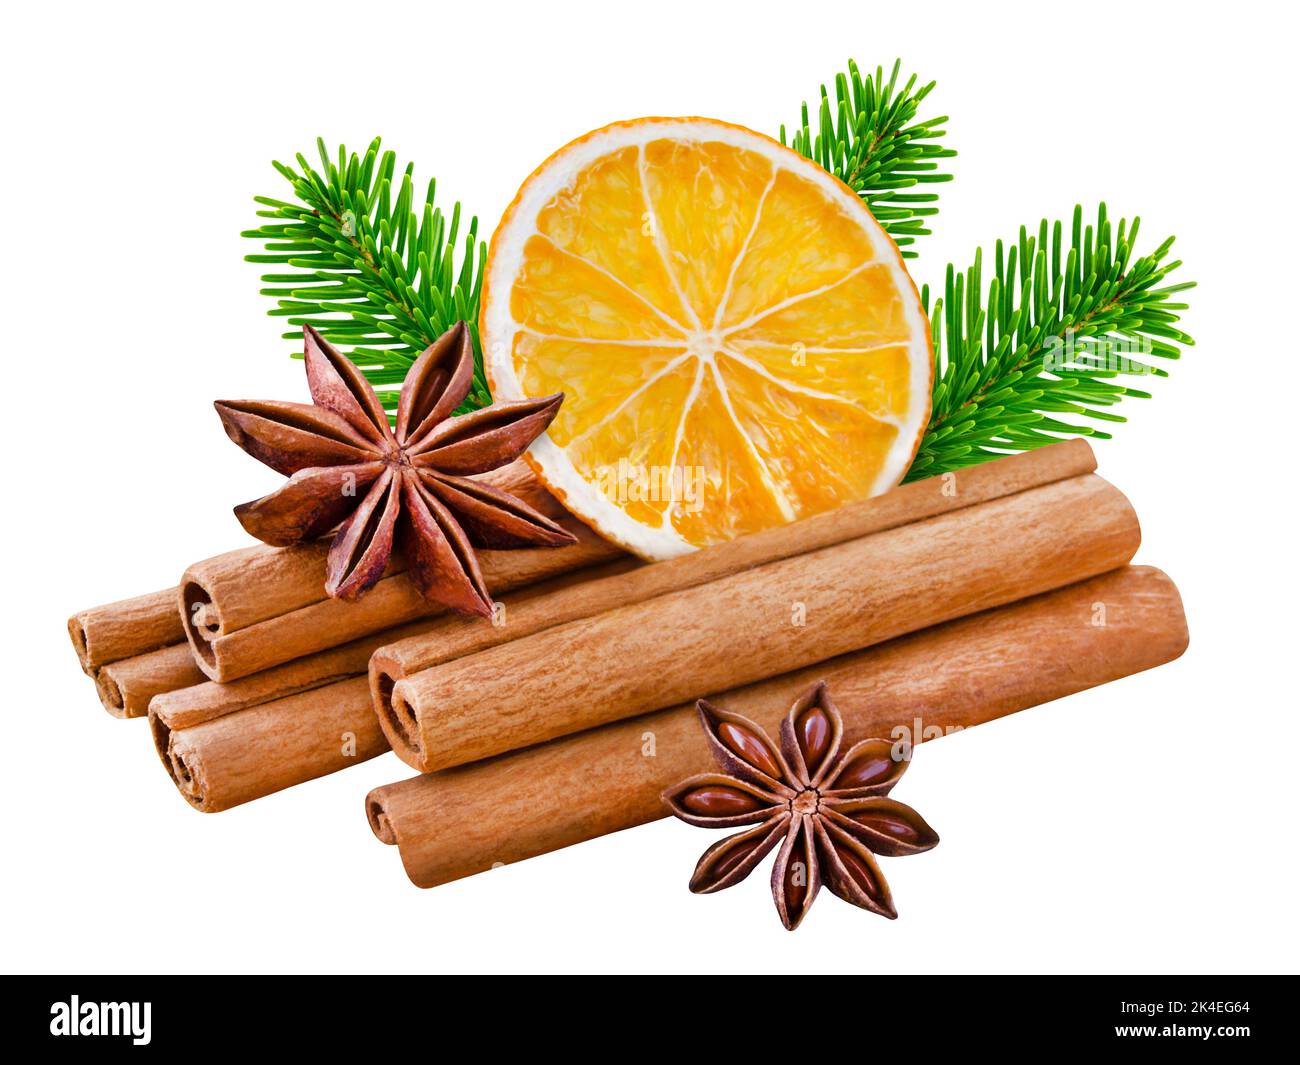 Cinnamon sticks and oranges with star anise isolated on white background Stock Photo